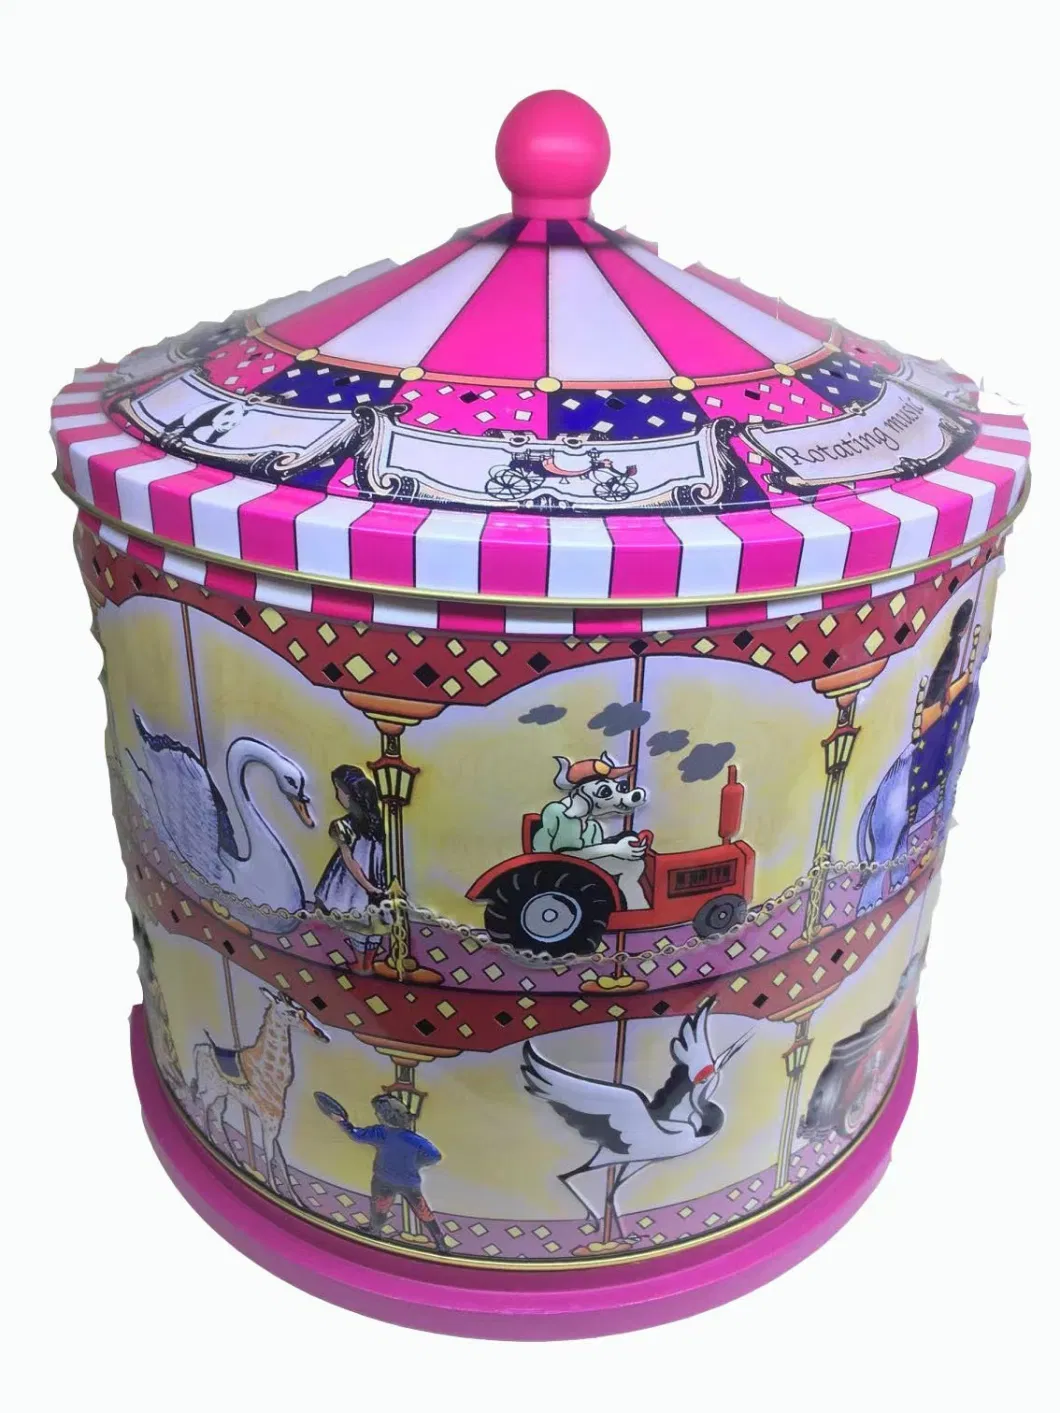 Decorative High Quality Round Carousel Music Cookie Tin Box with Embossing